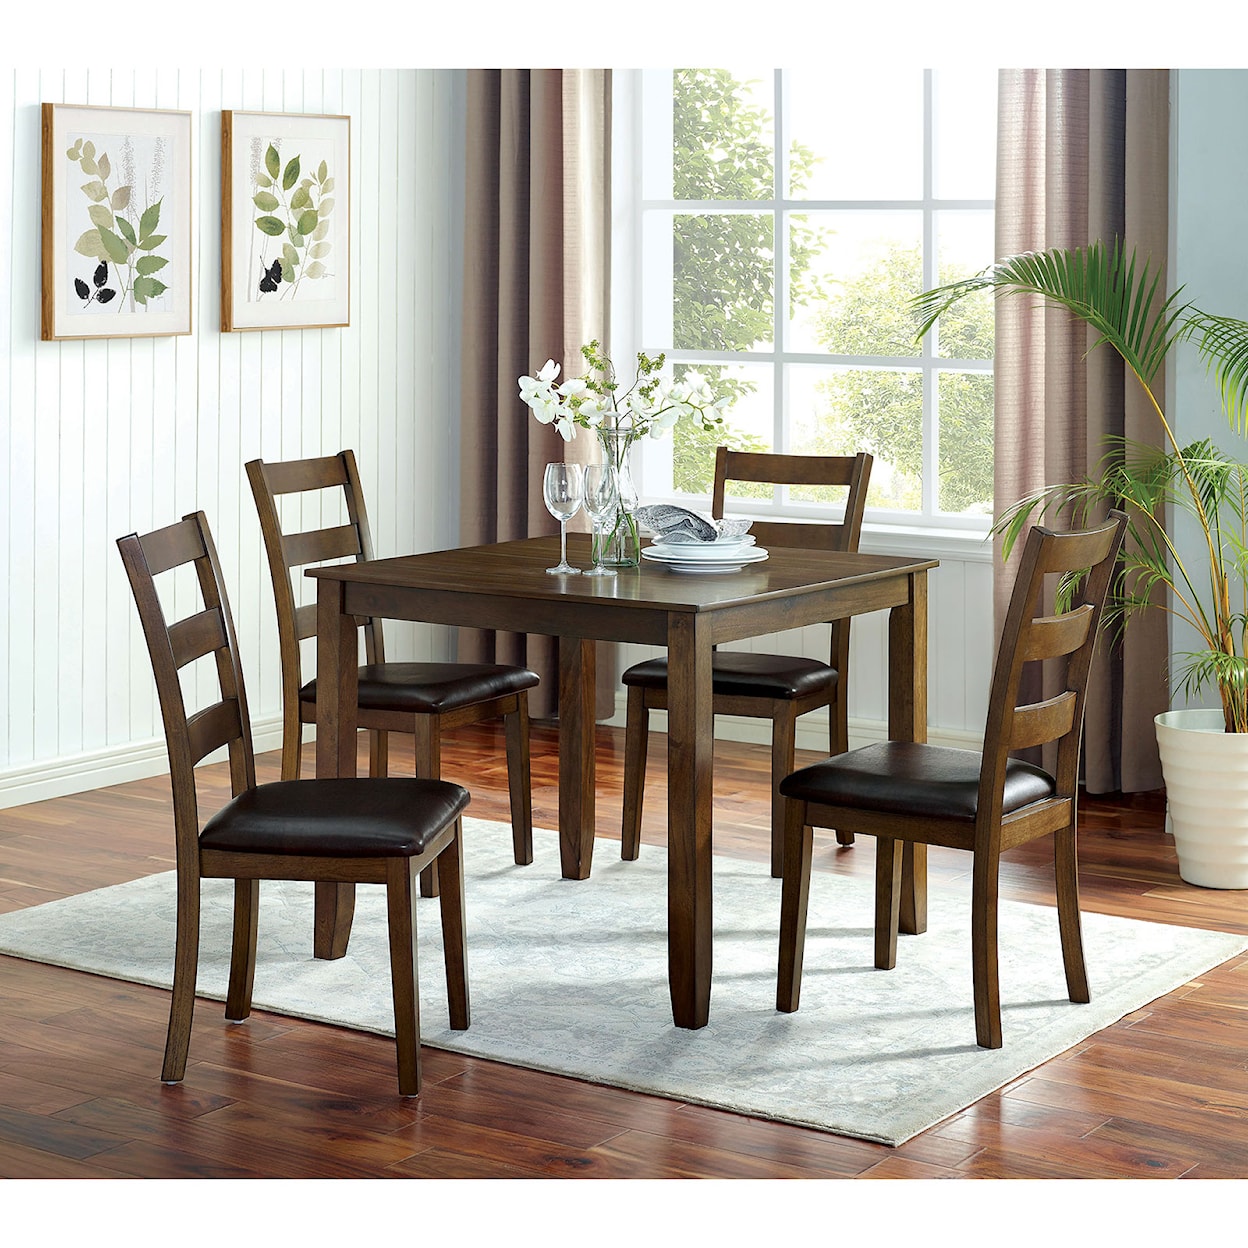 Furniture of America Gracefield 5 Pc. Dining Table Set